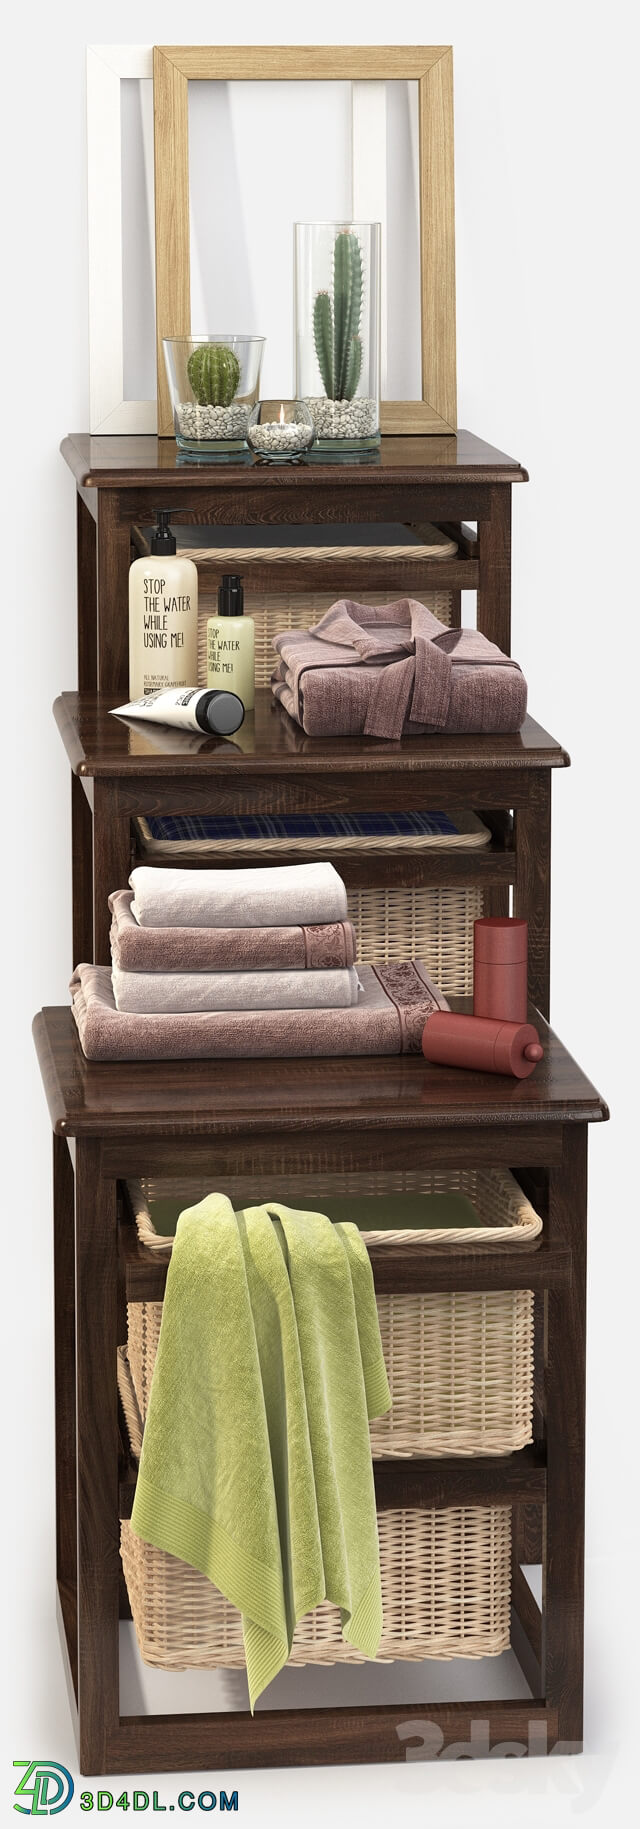 Bathroom accessories - Bathroom furniture with baskets model LAUNDRY wenge